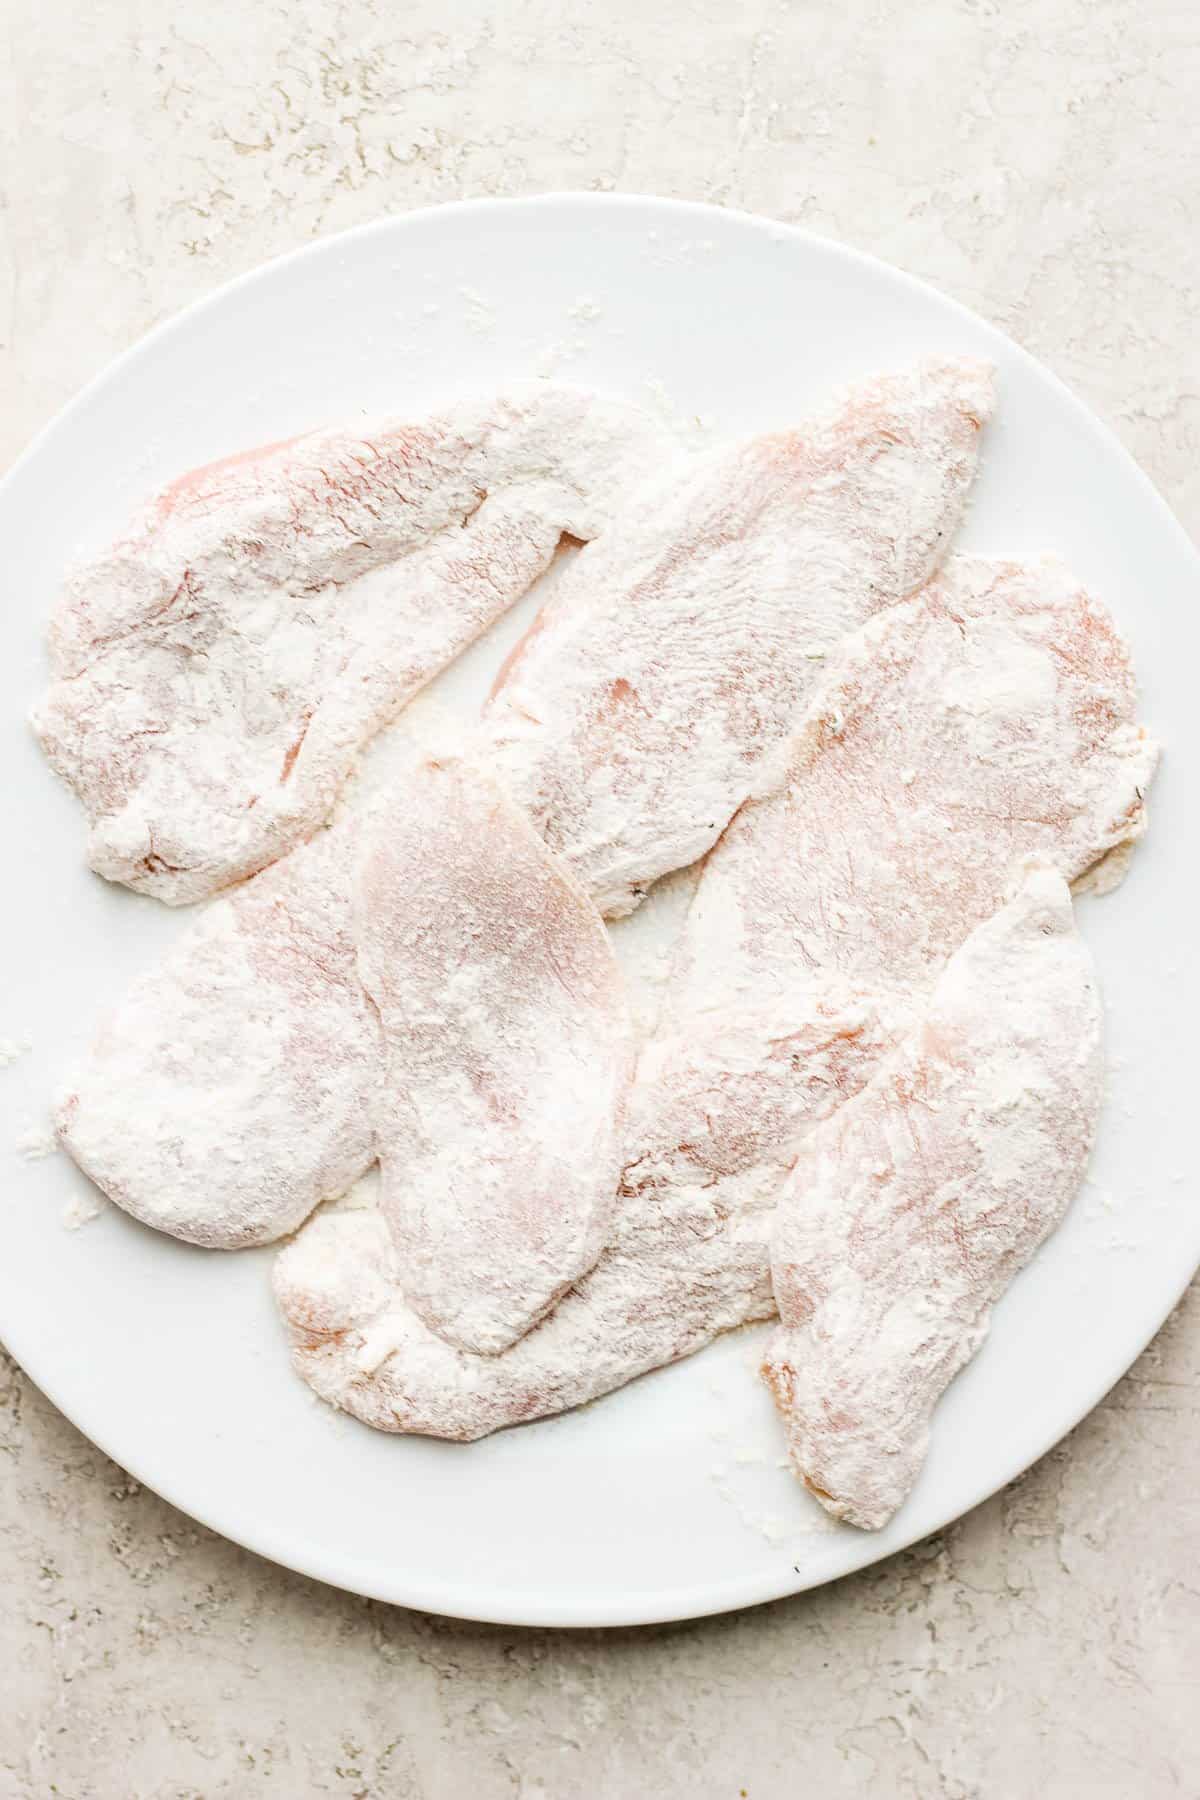 Seven flour and seasoning covered chicken cutlets on a clean plate.